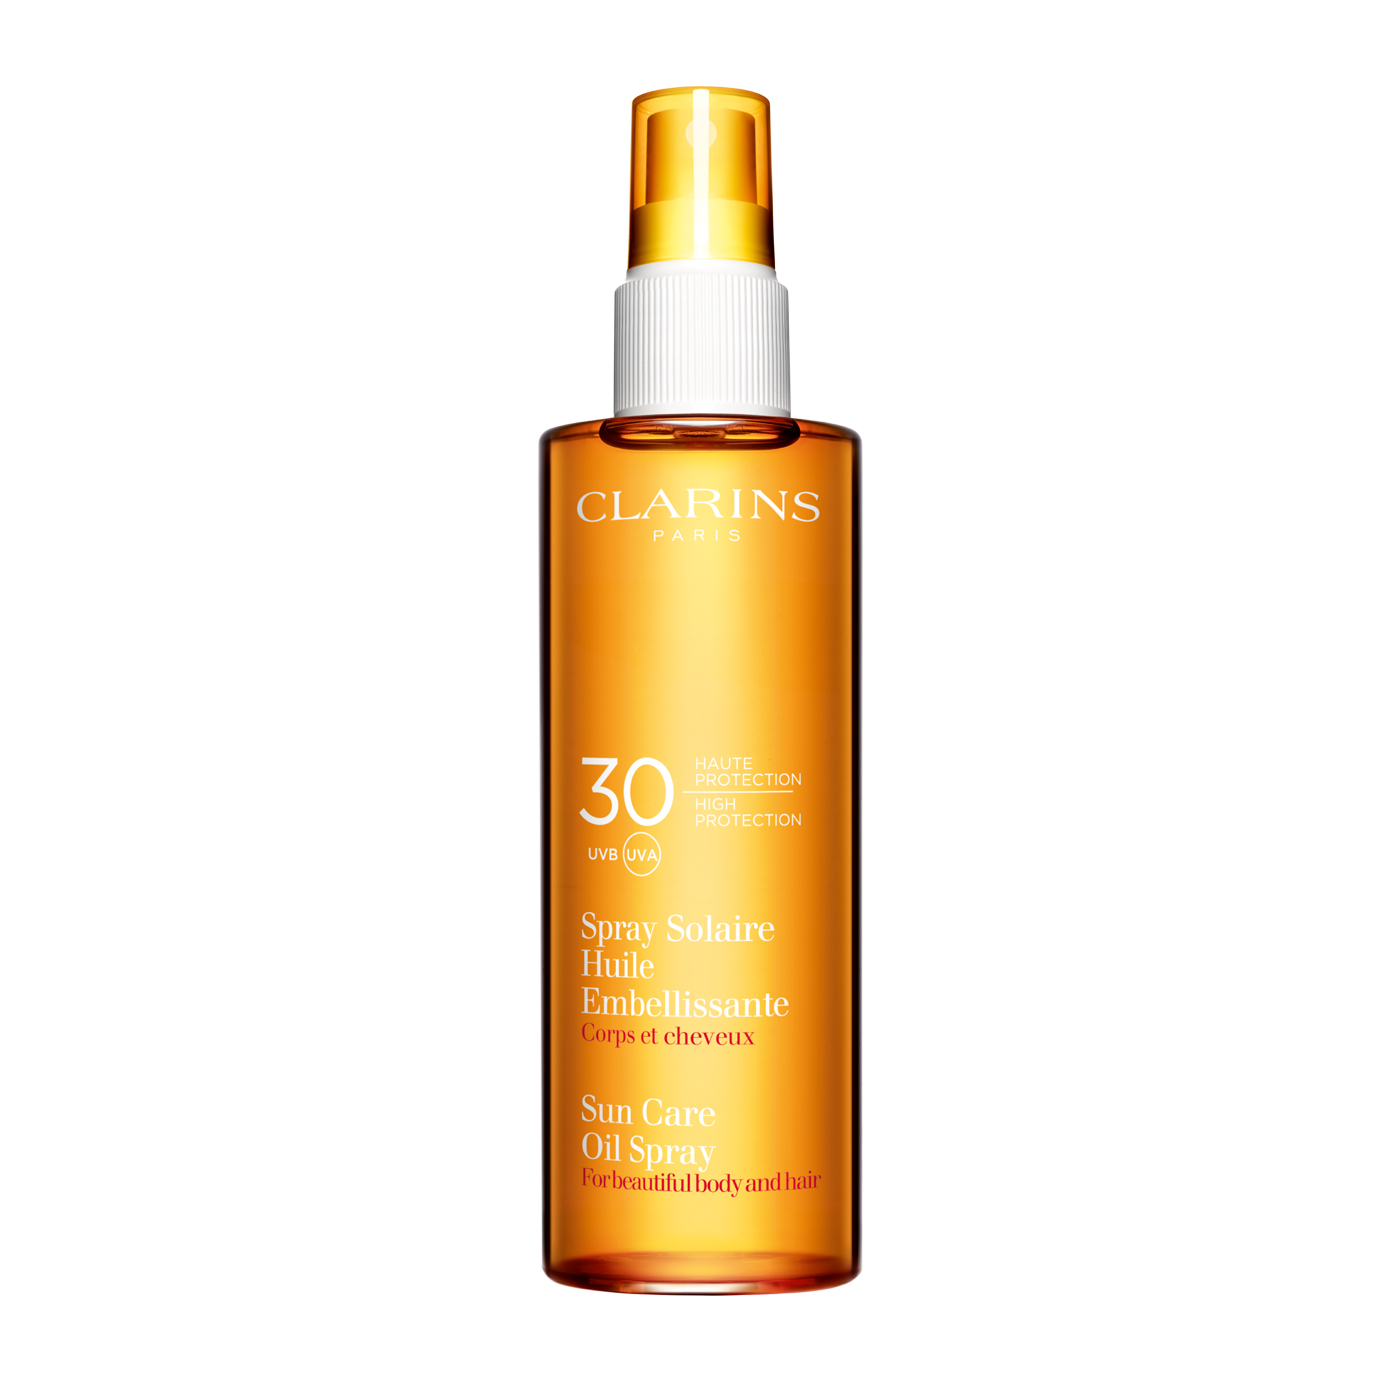 Spray Solaire Huile Embellissante Clarins